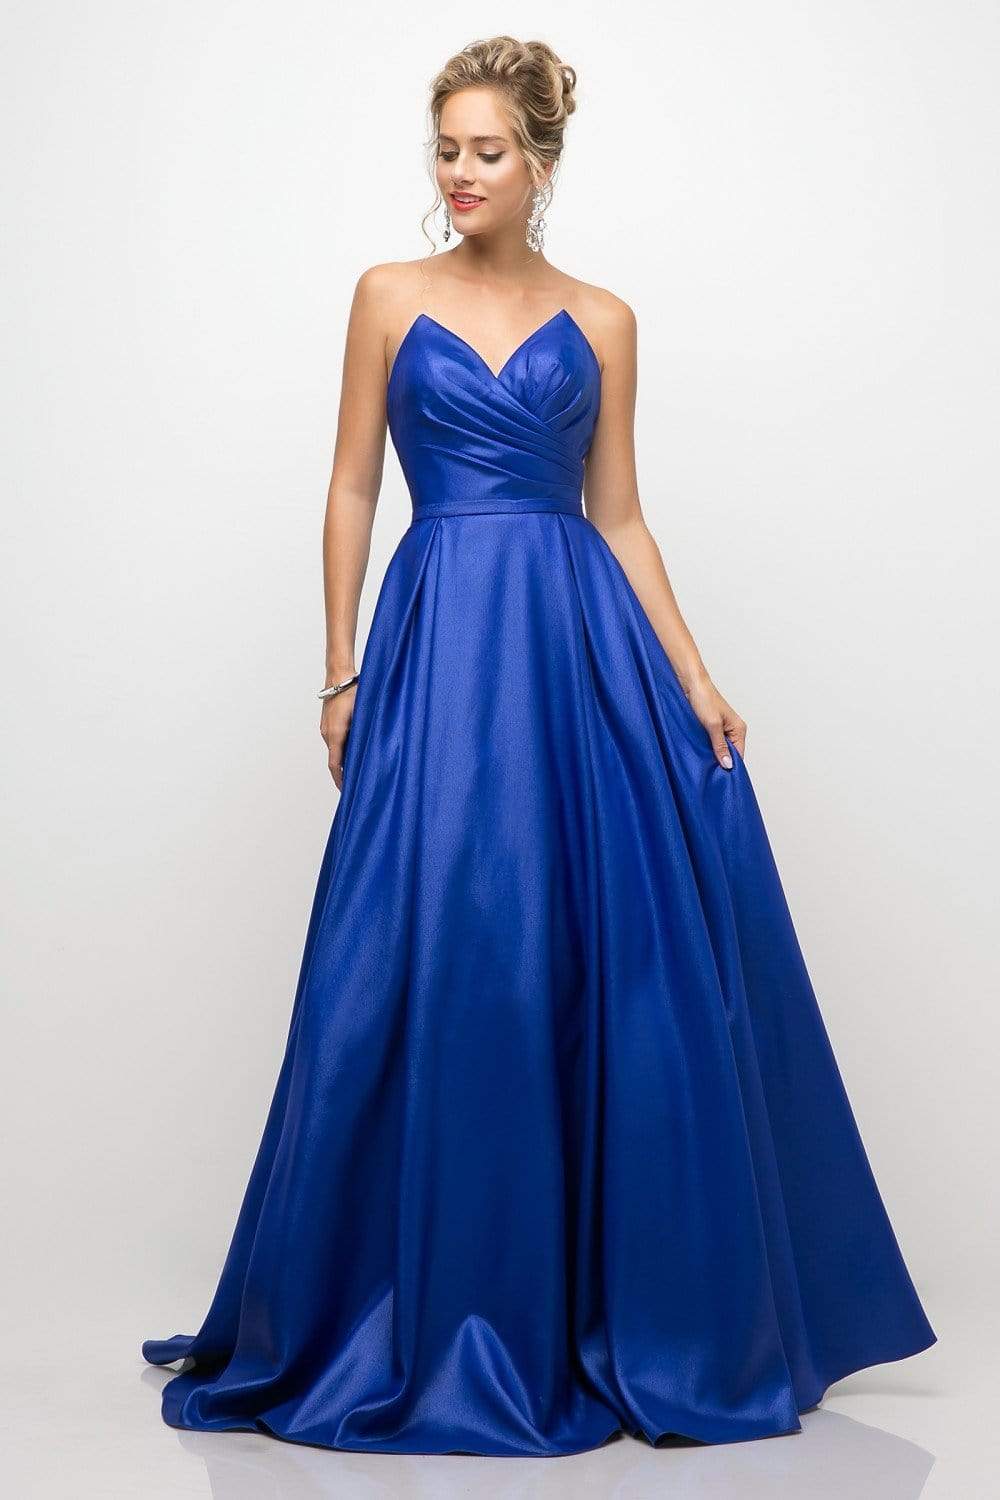 Cinderella Divine - UE008 Strapless Pointed Sweetheart Neck Backless Ballgown Special Occasion Dress 2 / Royal